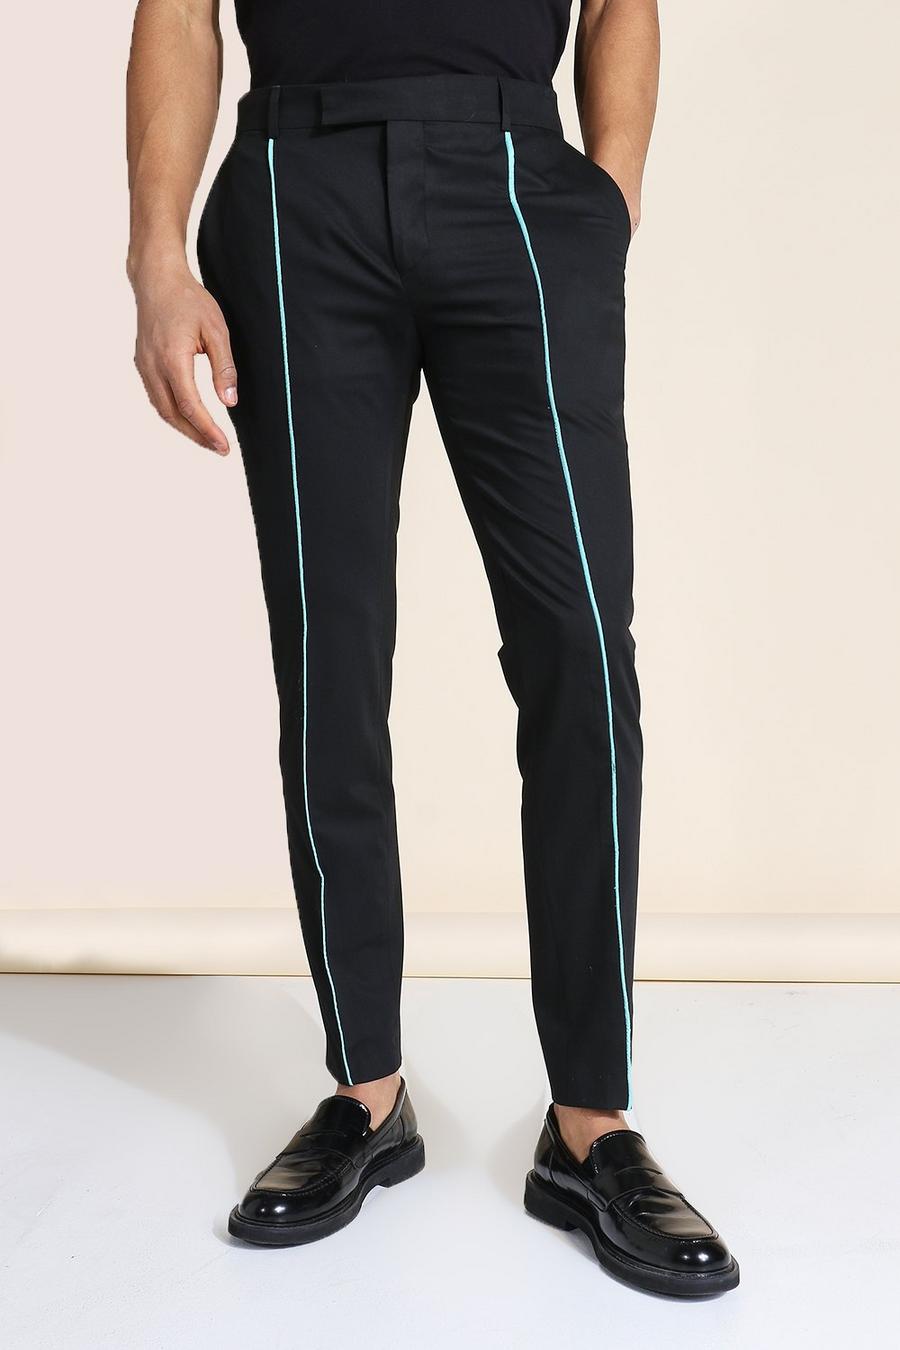 Teal Skinny Neon Piped Tailored Pants image number 1